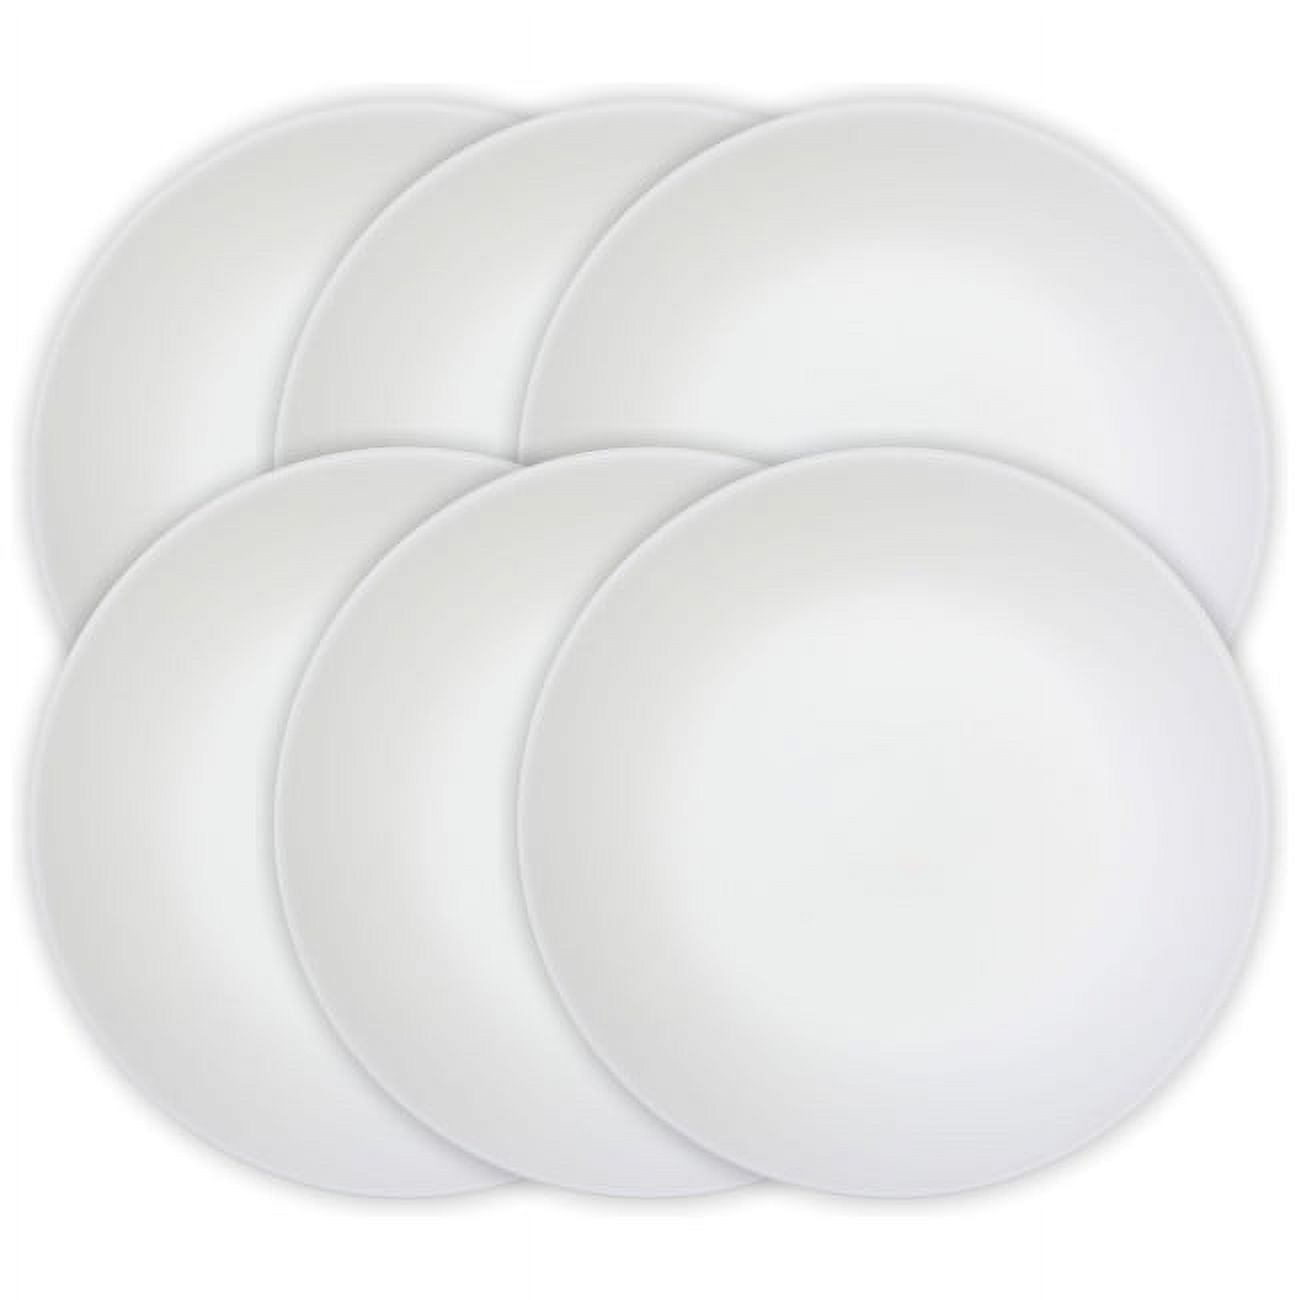 Corelle Winter Frost White 10.25" Dinner Plate, Set of 6 - image 1 of 8